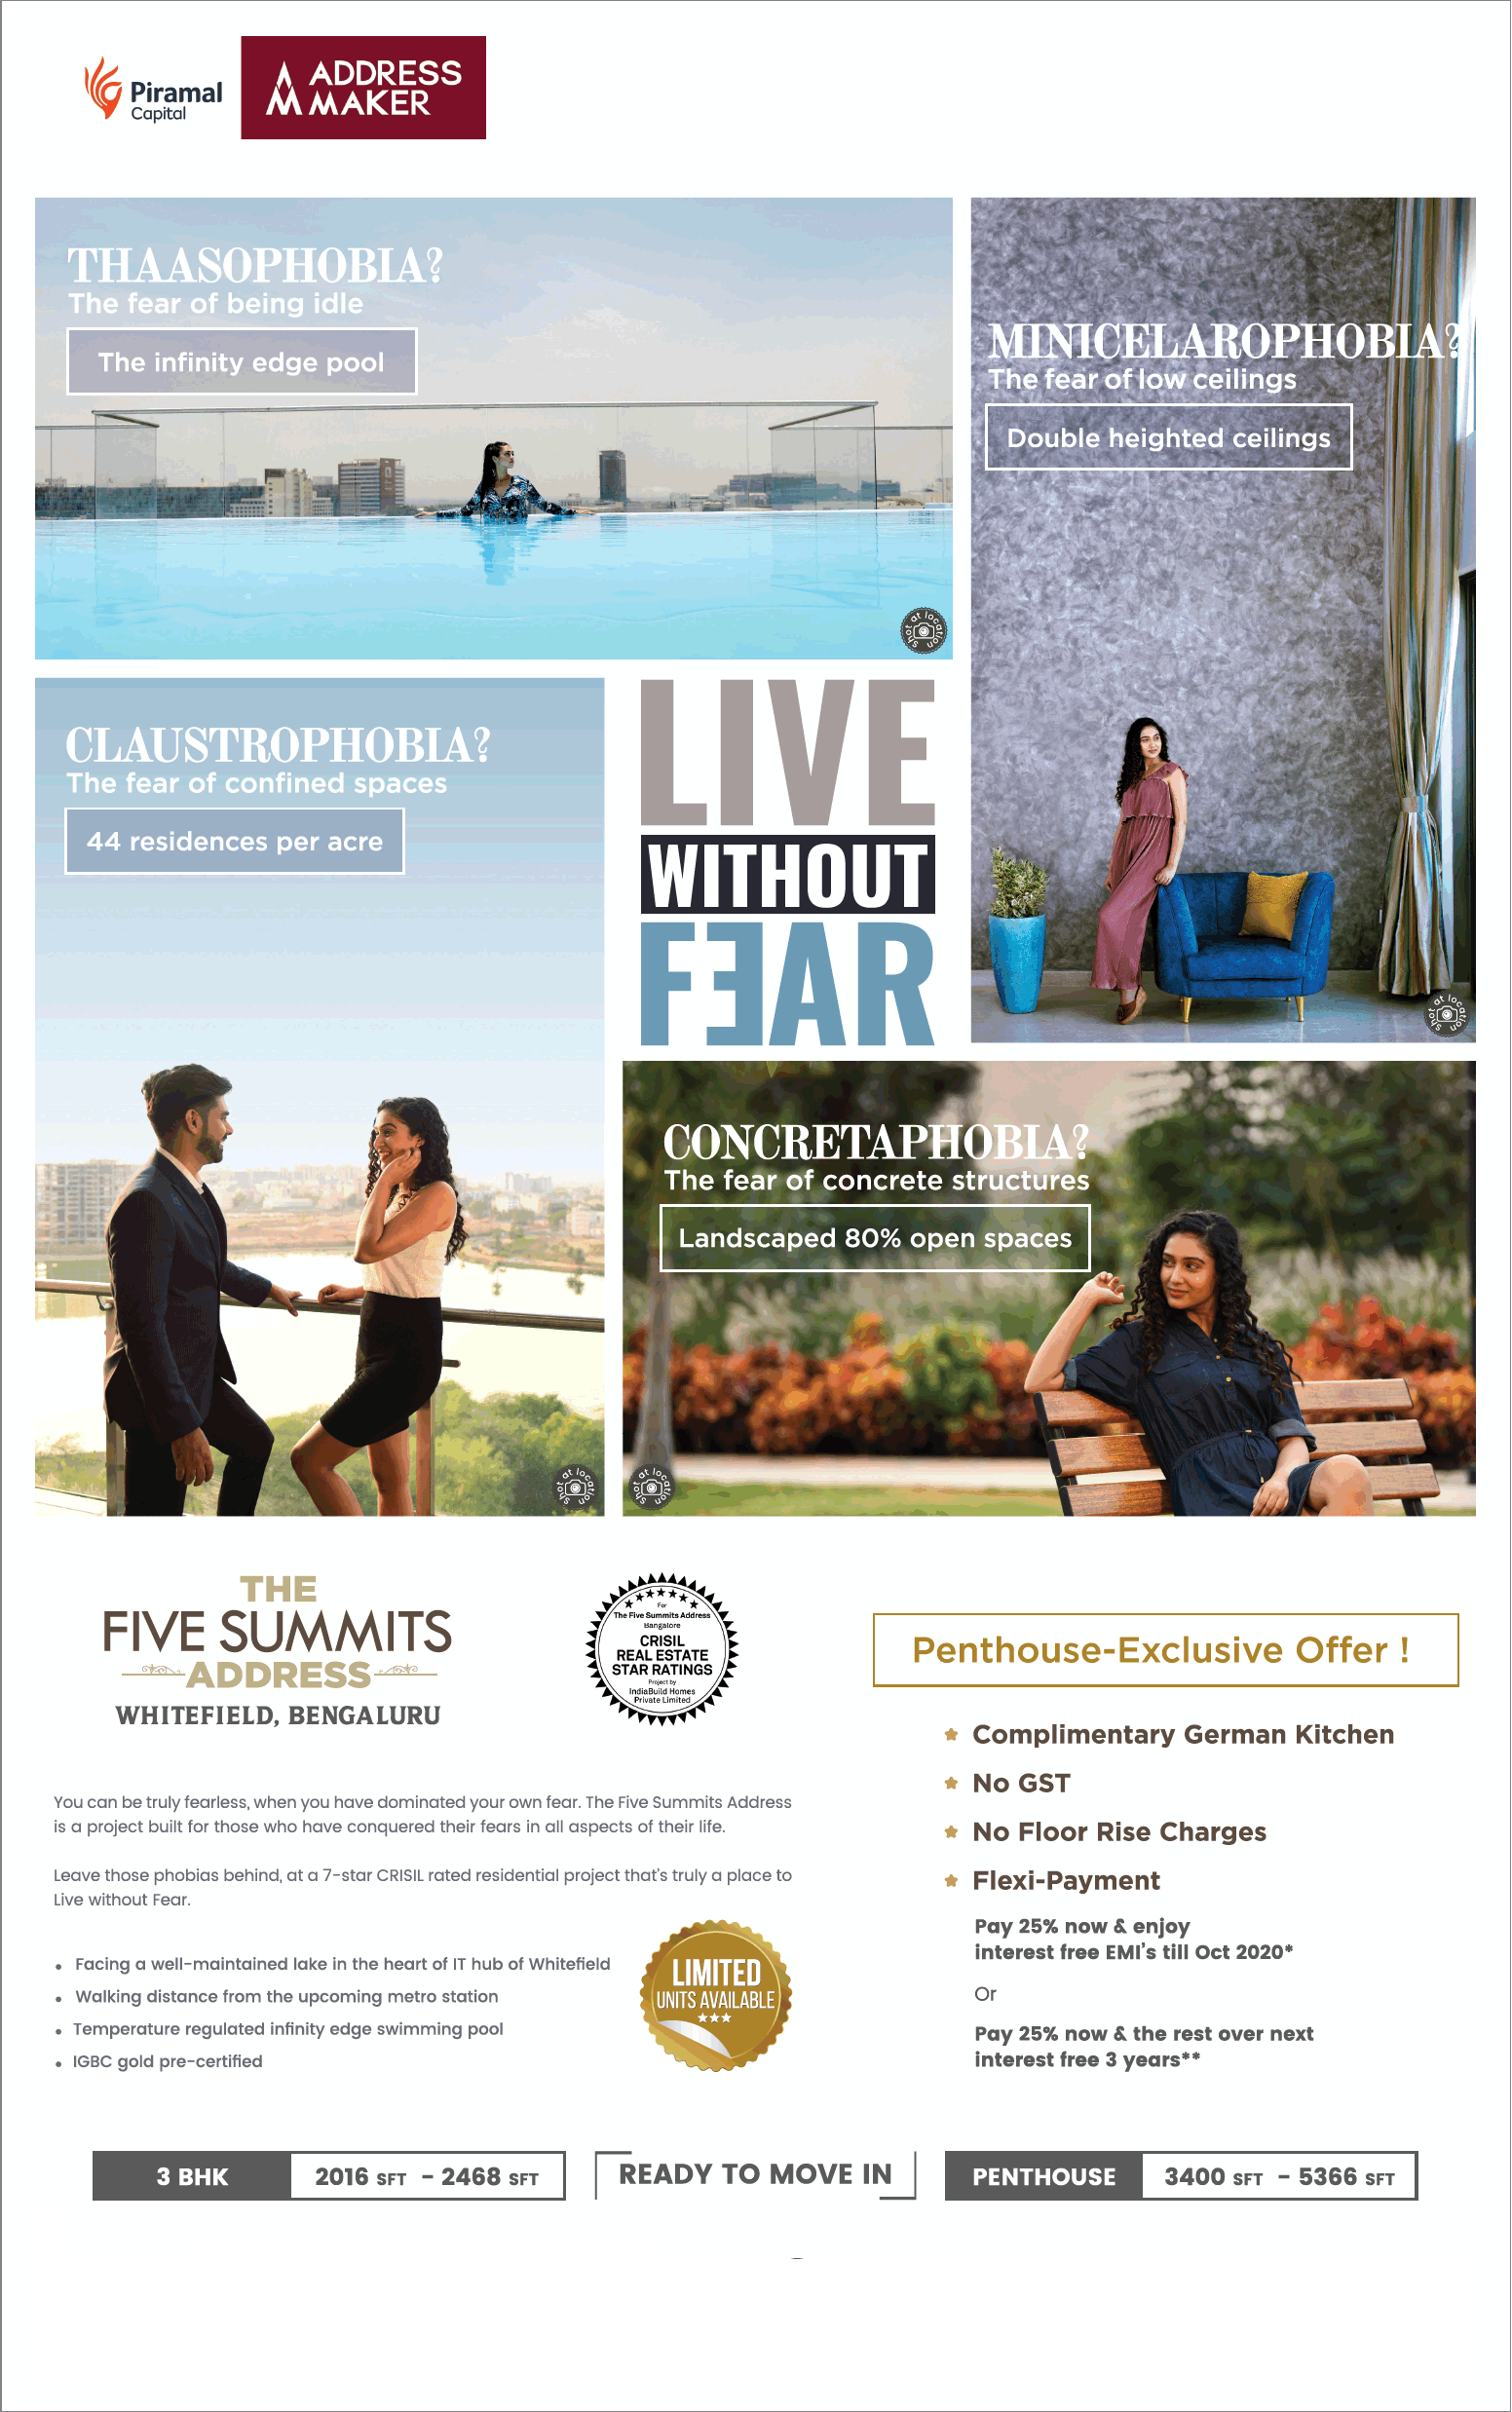 Book 3 BHK apartments and penthouse on exclusive offer at The Five Summits Address, Bangalore Update